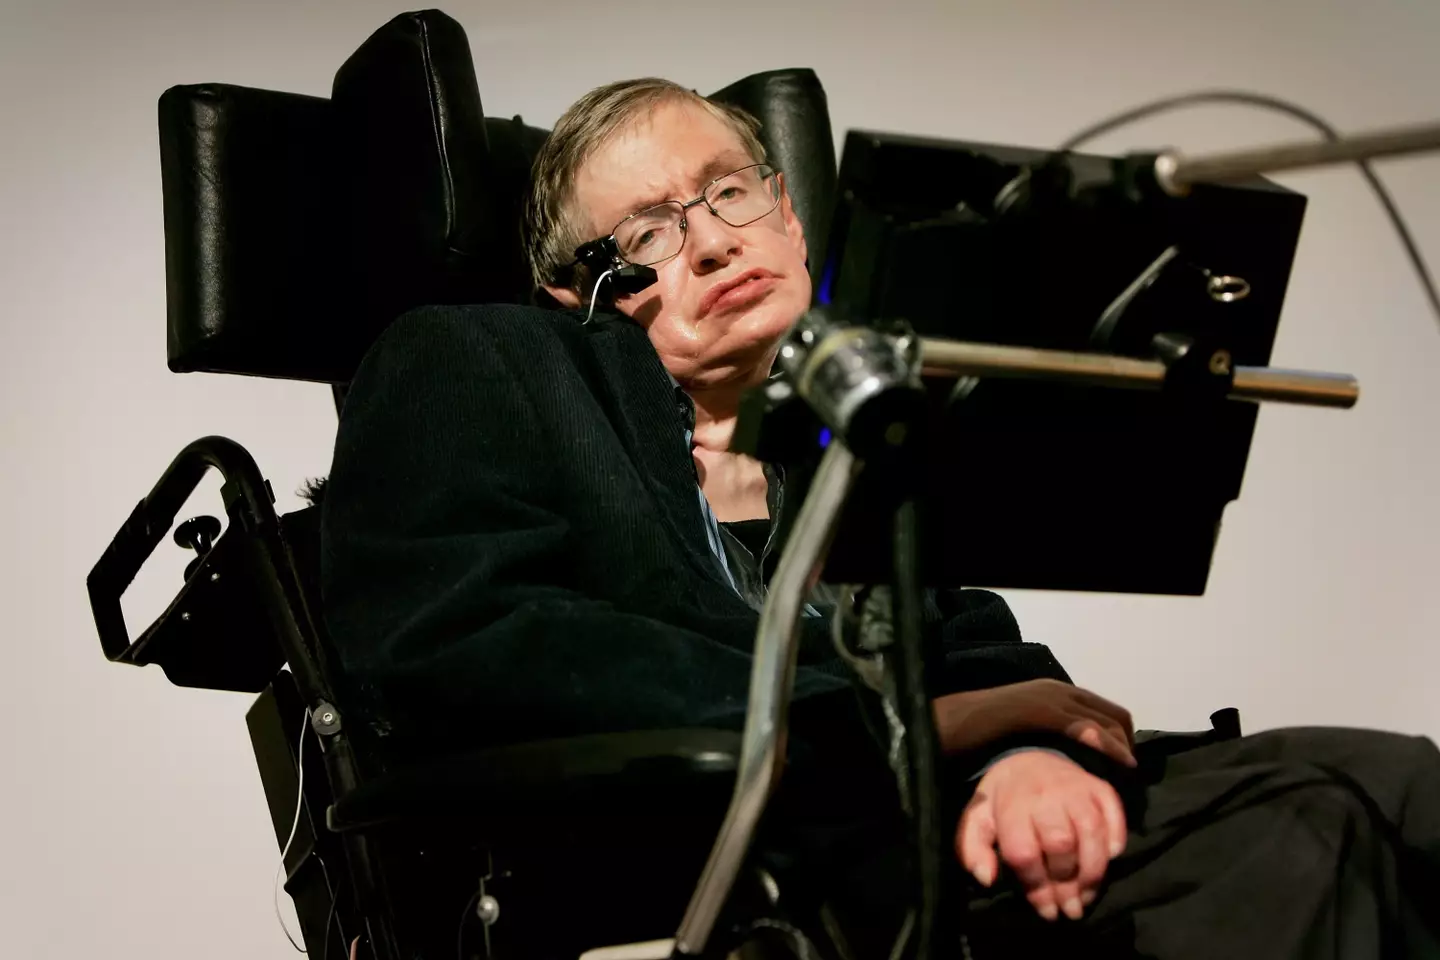 Stephen Hawking warned about the rise of AI.